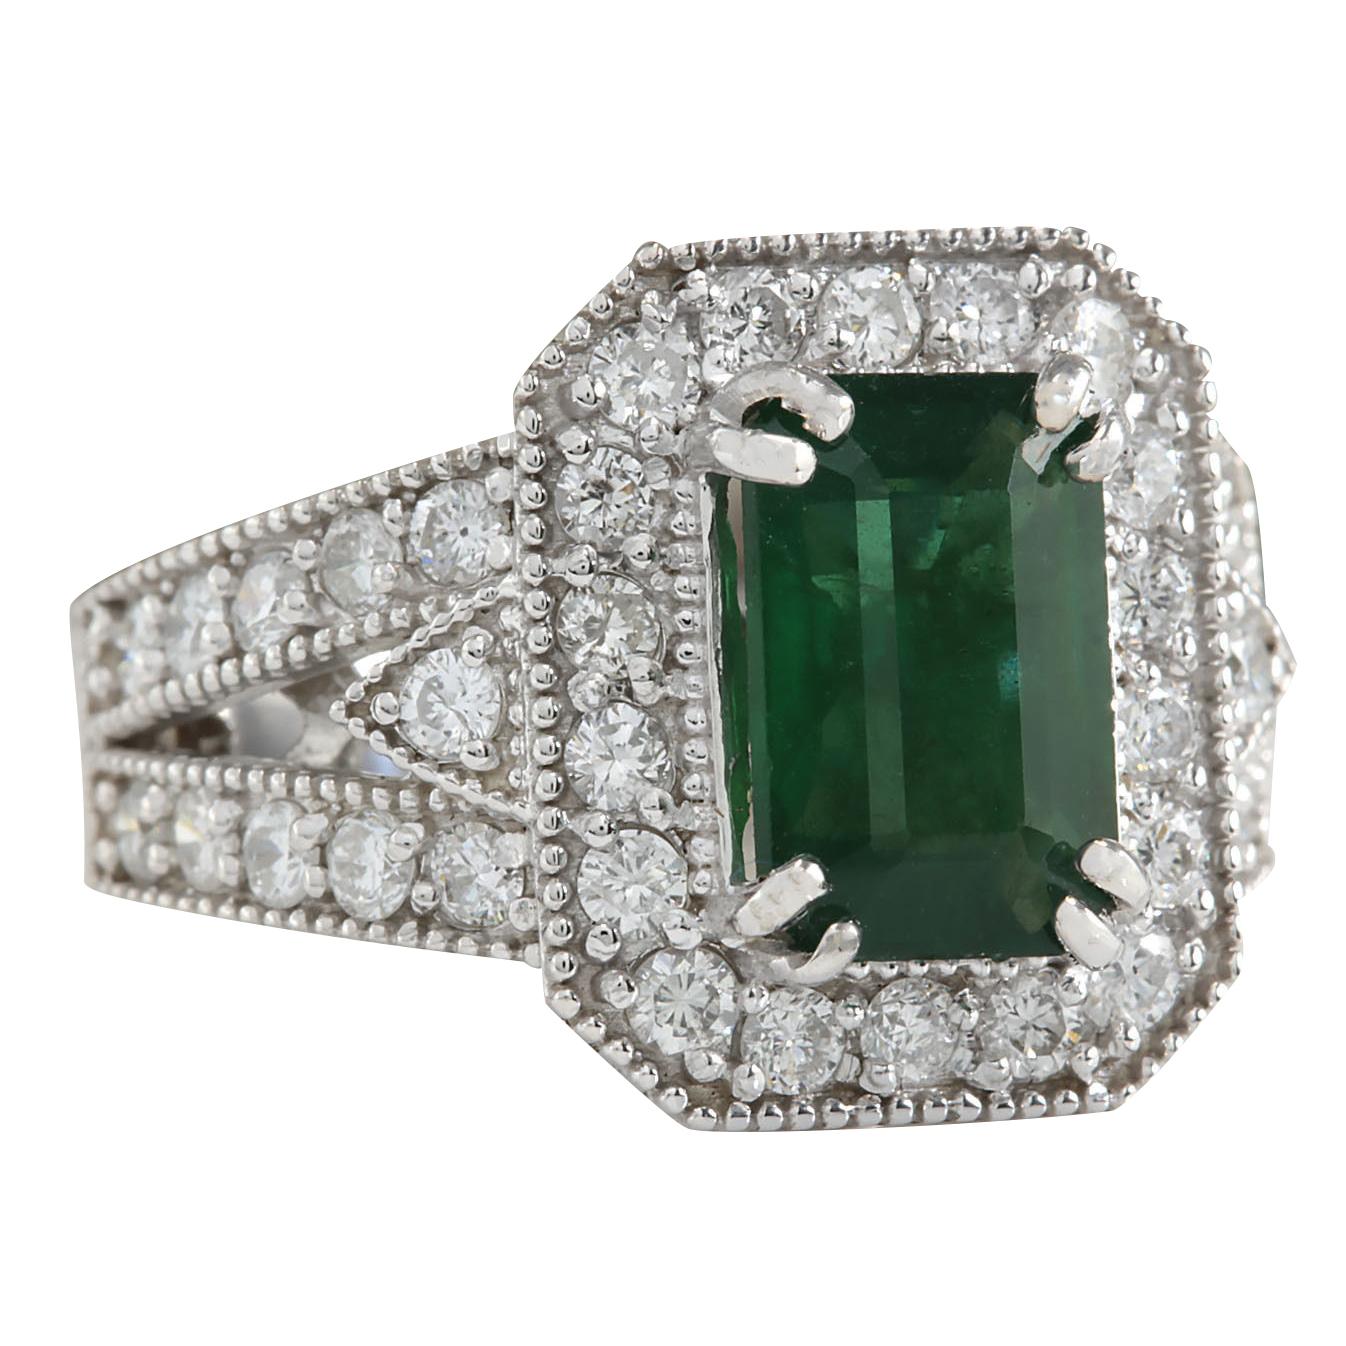 Stamped: 14K White Gold
Total Ring Weight: 8.0 Grams
Total Natural Emerald Weight is 2.38 Carat (Measures: 10.00x8.00 mm)
Color: Green
Total Natural Diamond Weight is 1.20 Carat
Color: F-G, Clarity: VS2-SI1
Face Measures: 15.75x13.30 mm
Sku: